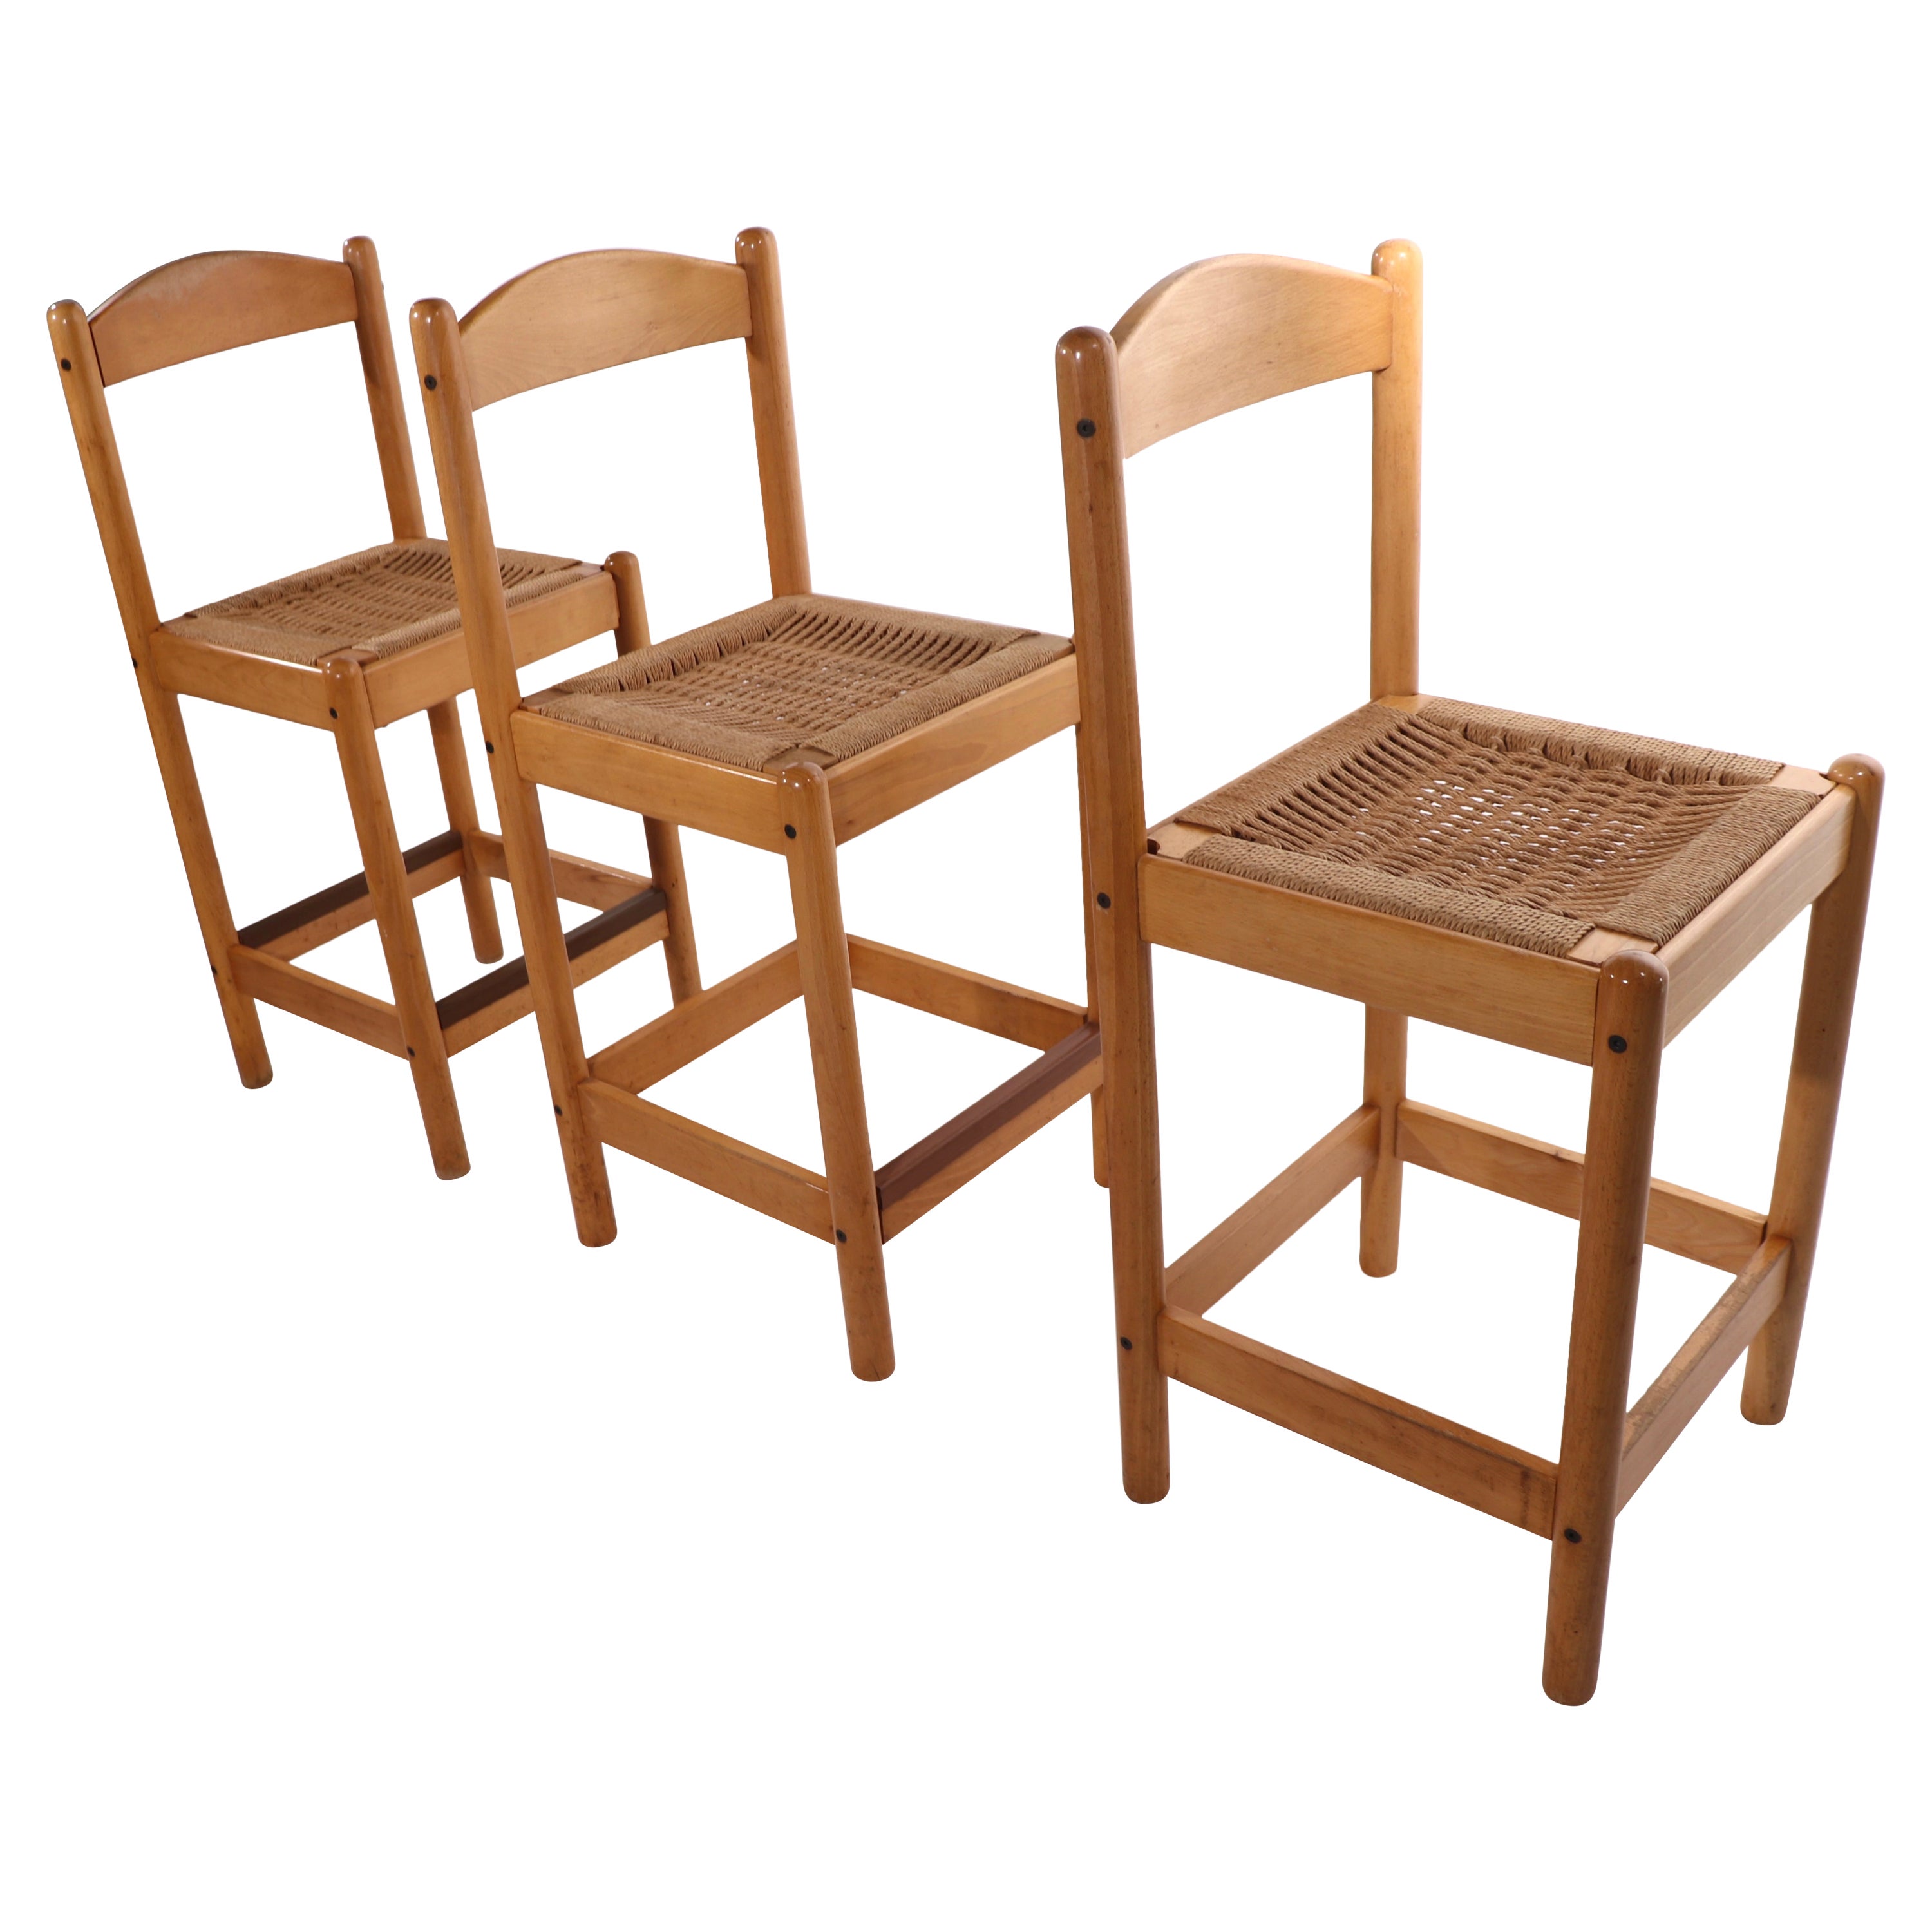 3 Post Modern Blonde Beechwood Stools Made in Italy